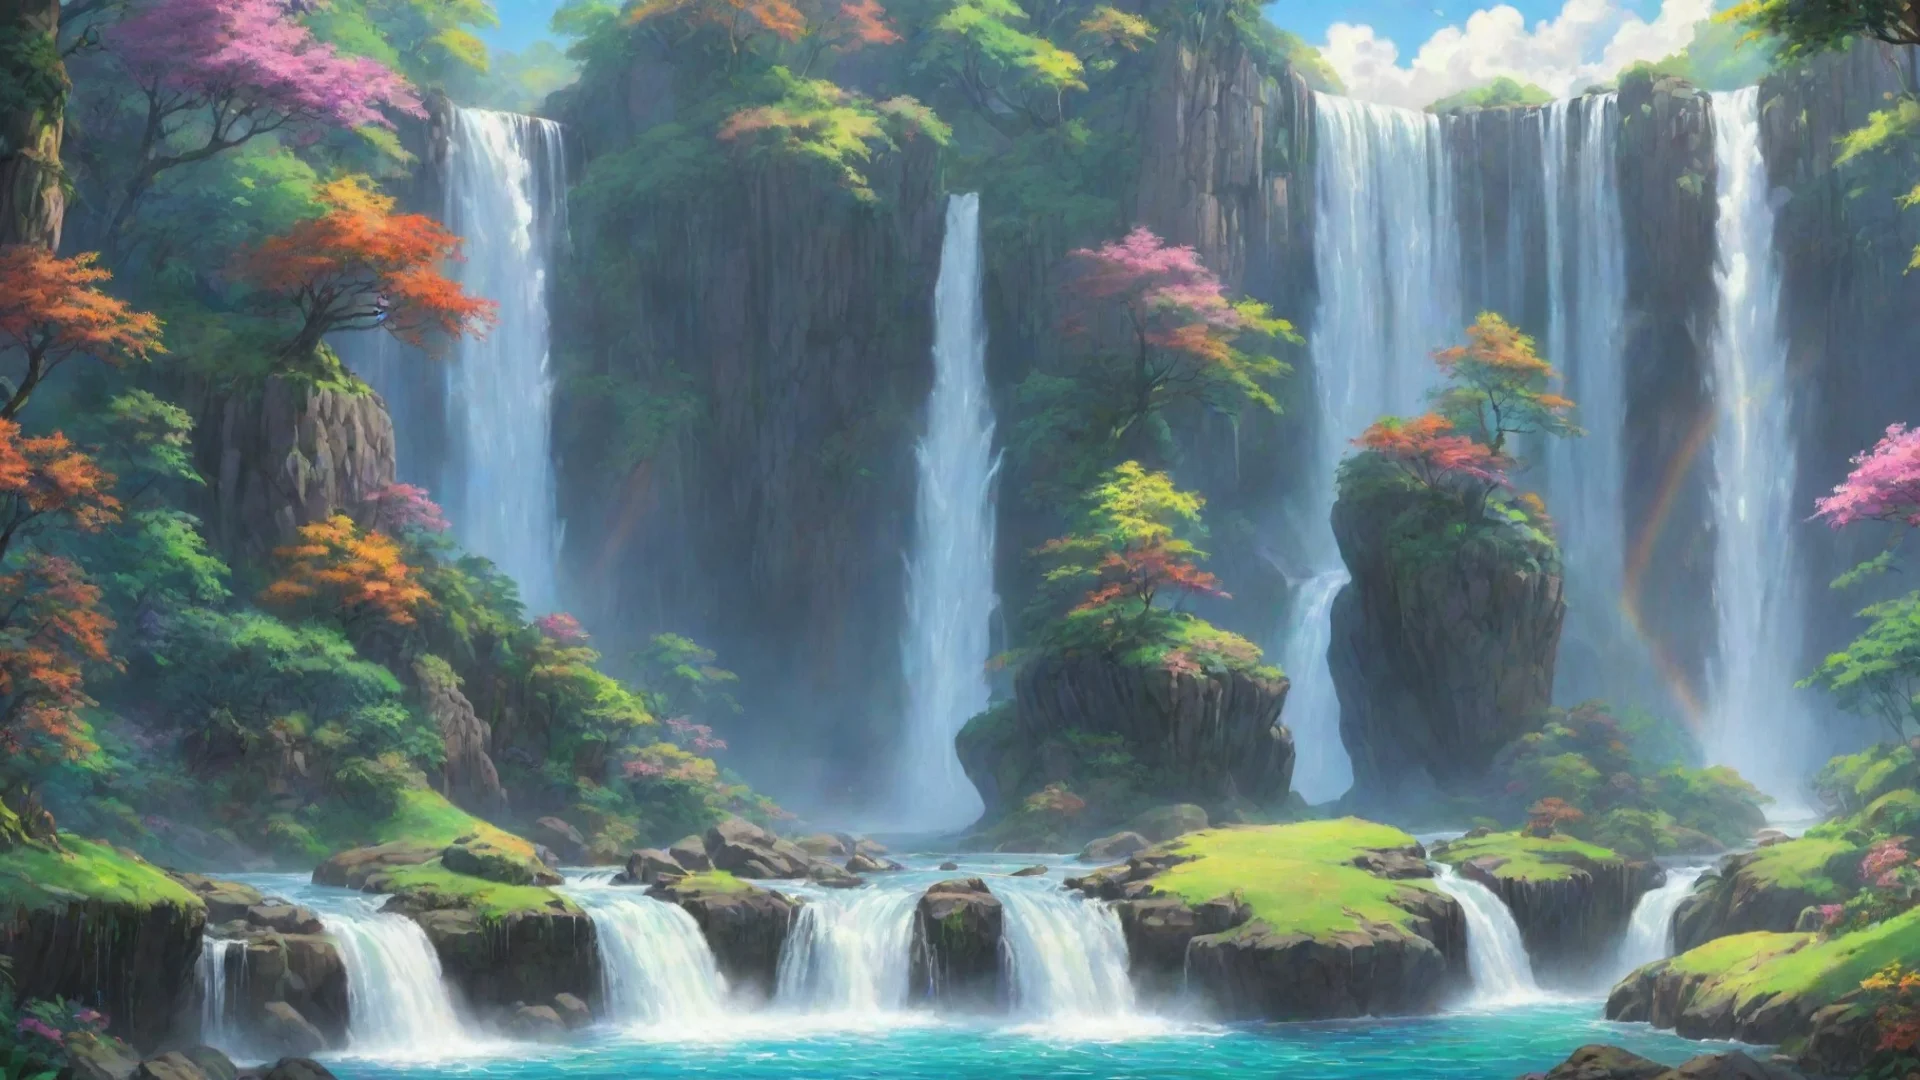 ailowfi relaxing calming on colorful chilling relaxing with lush wonderful environment waterfalls rainbows hd ghibli fantasy fantastic wide